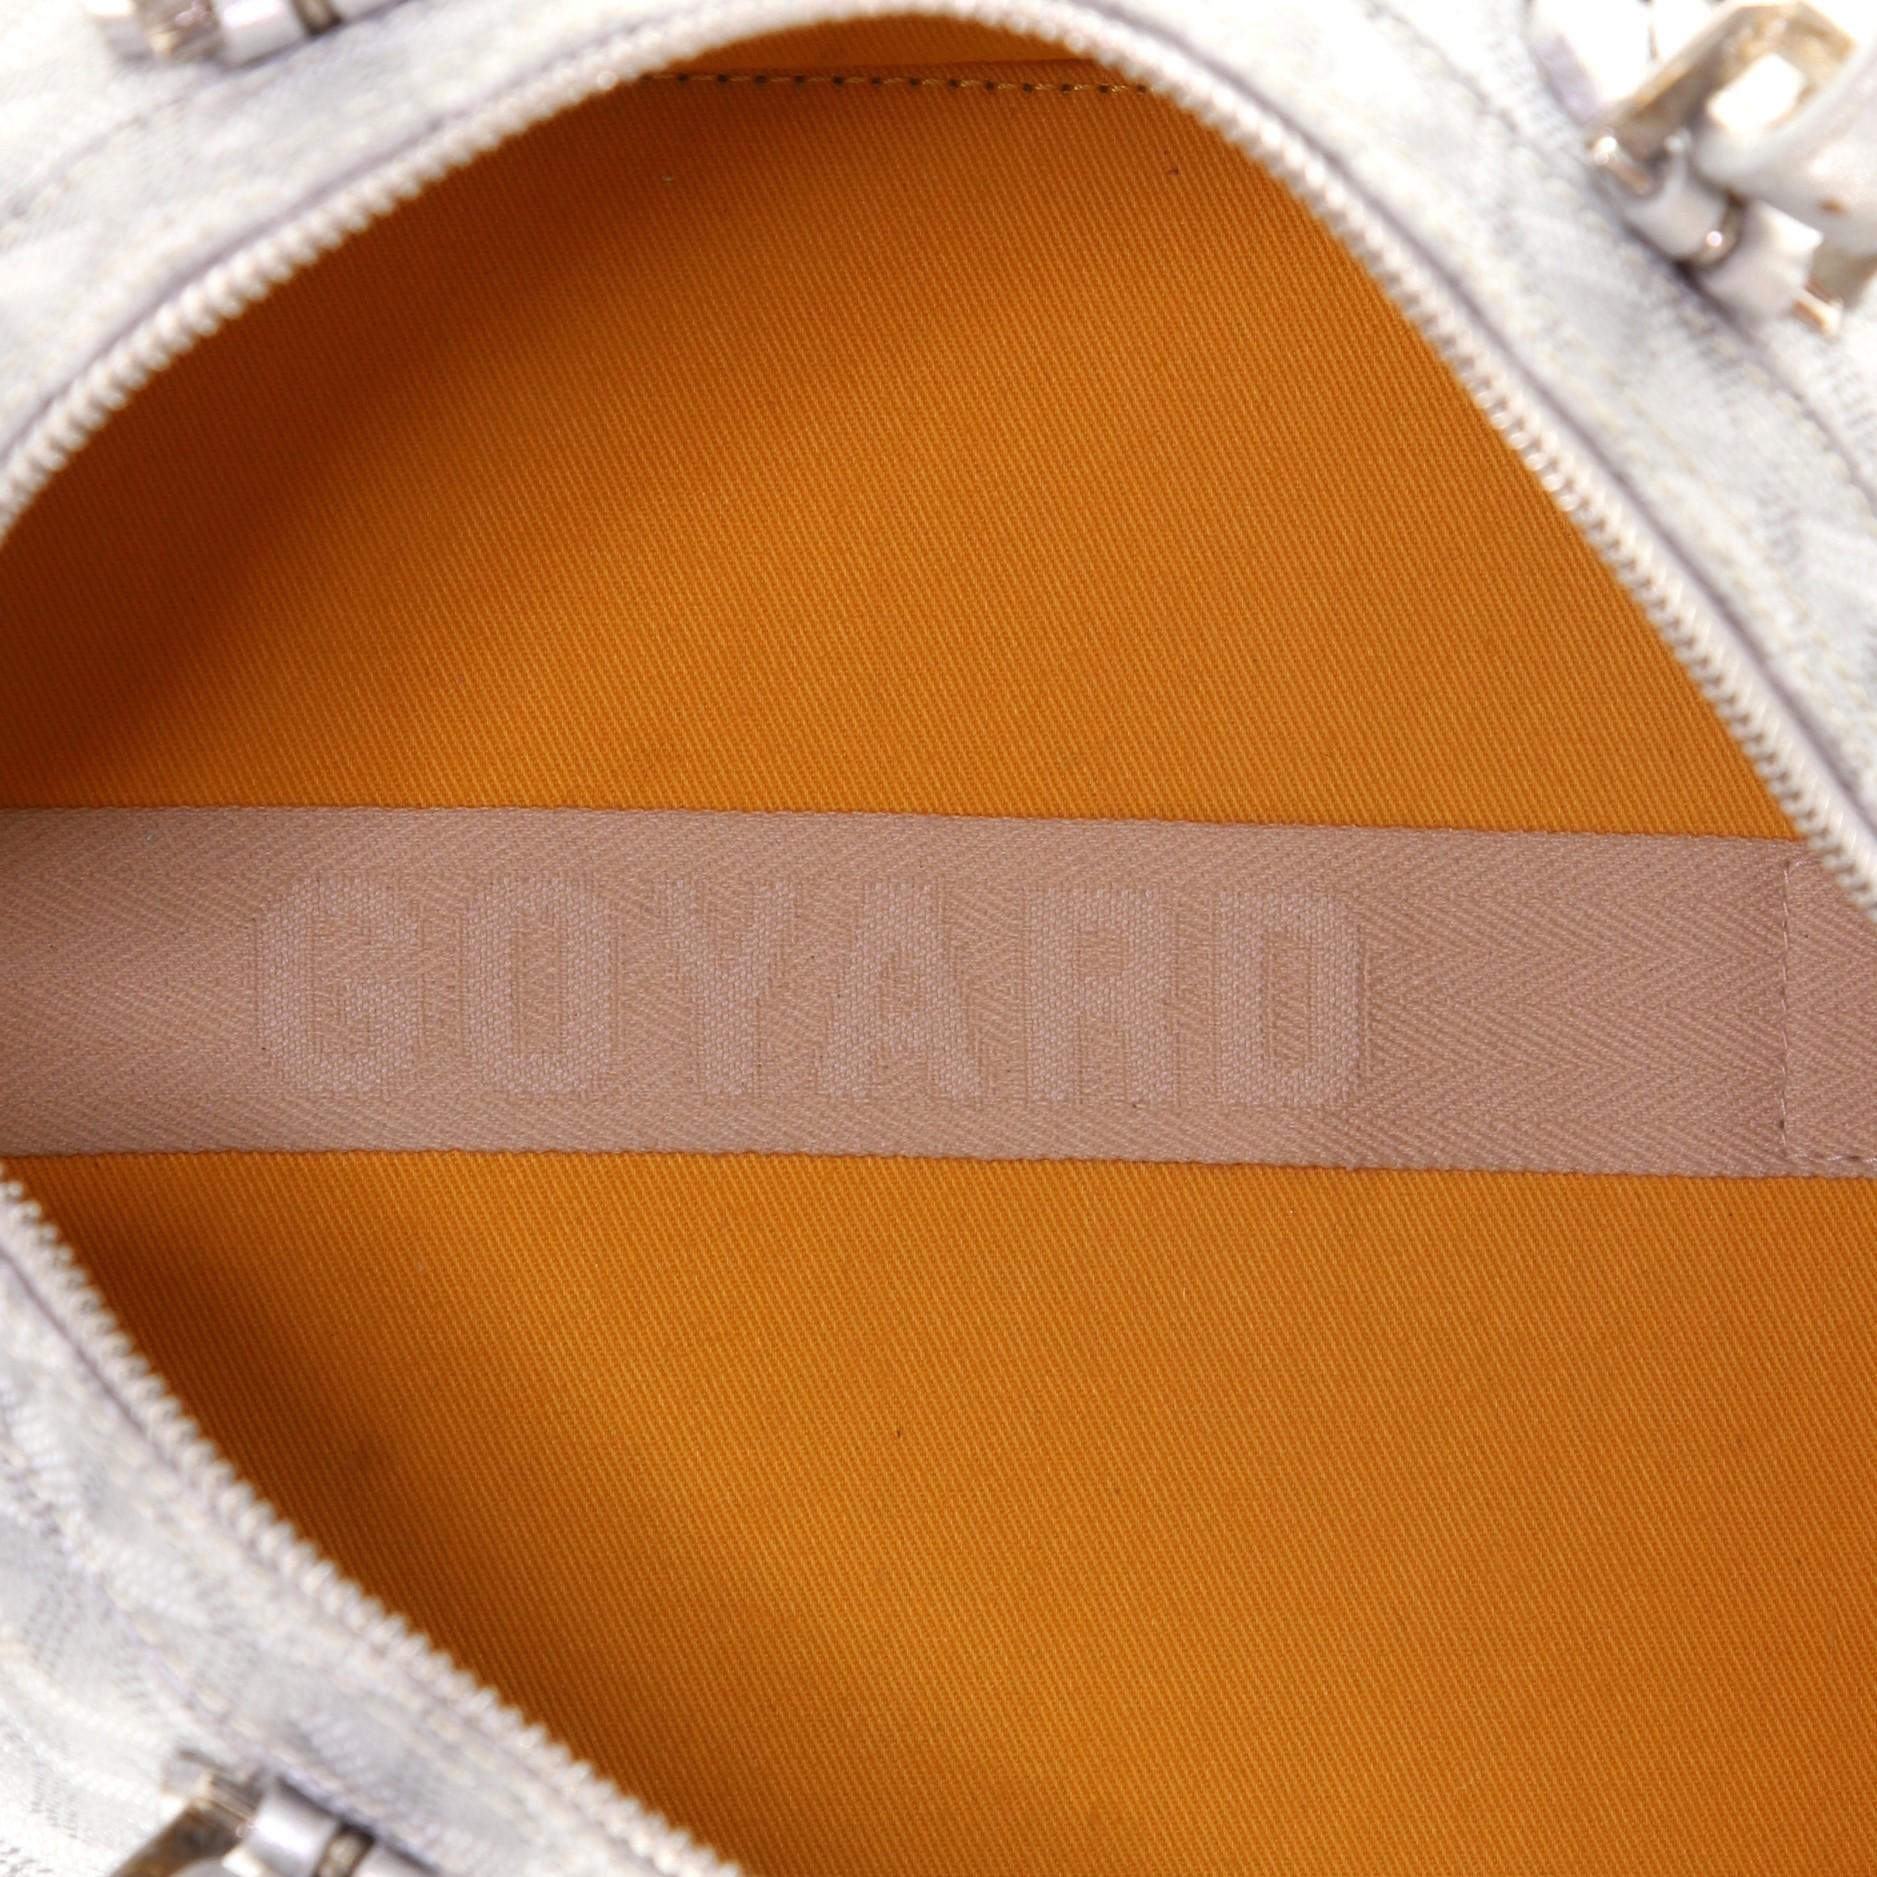 how much are goyard bags